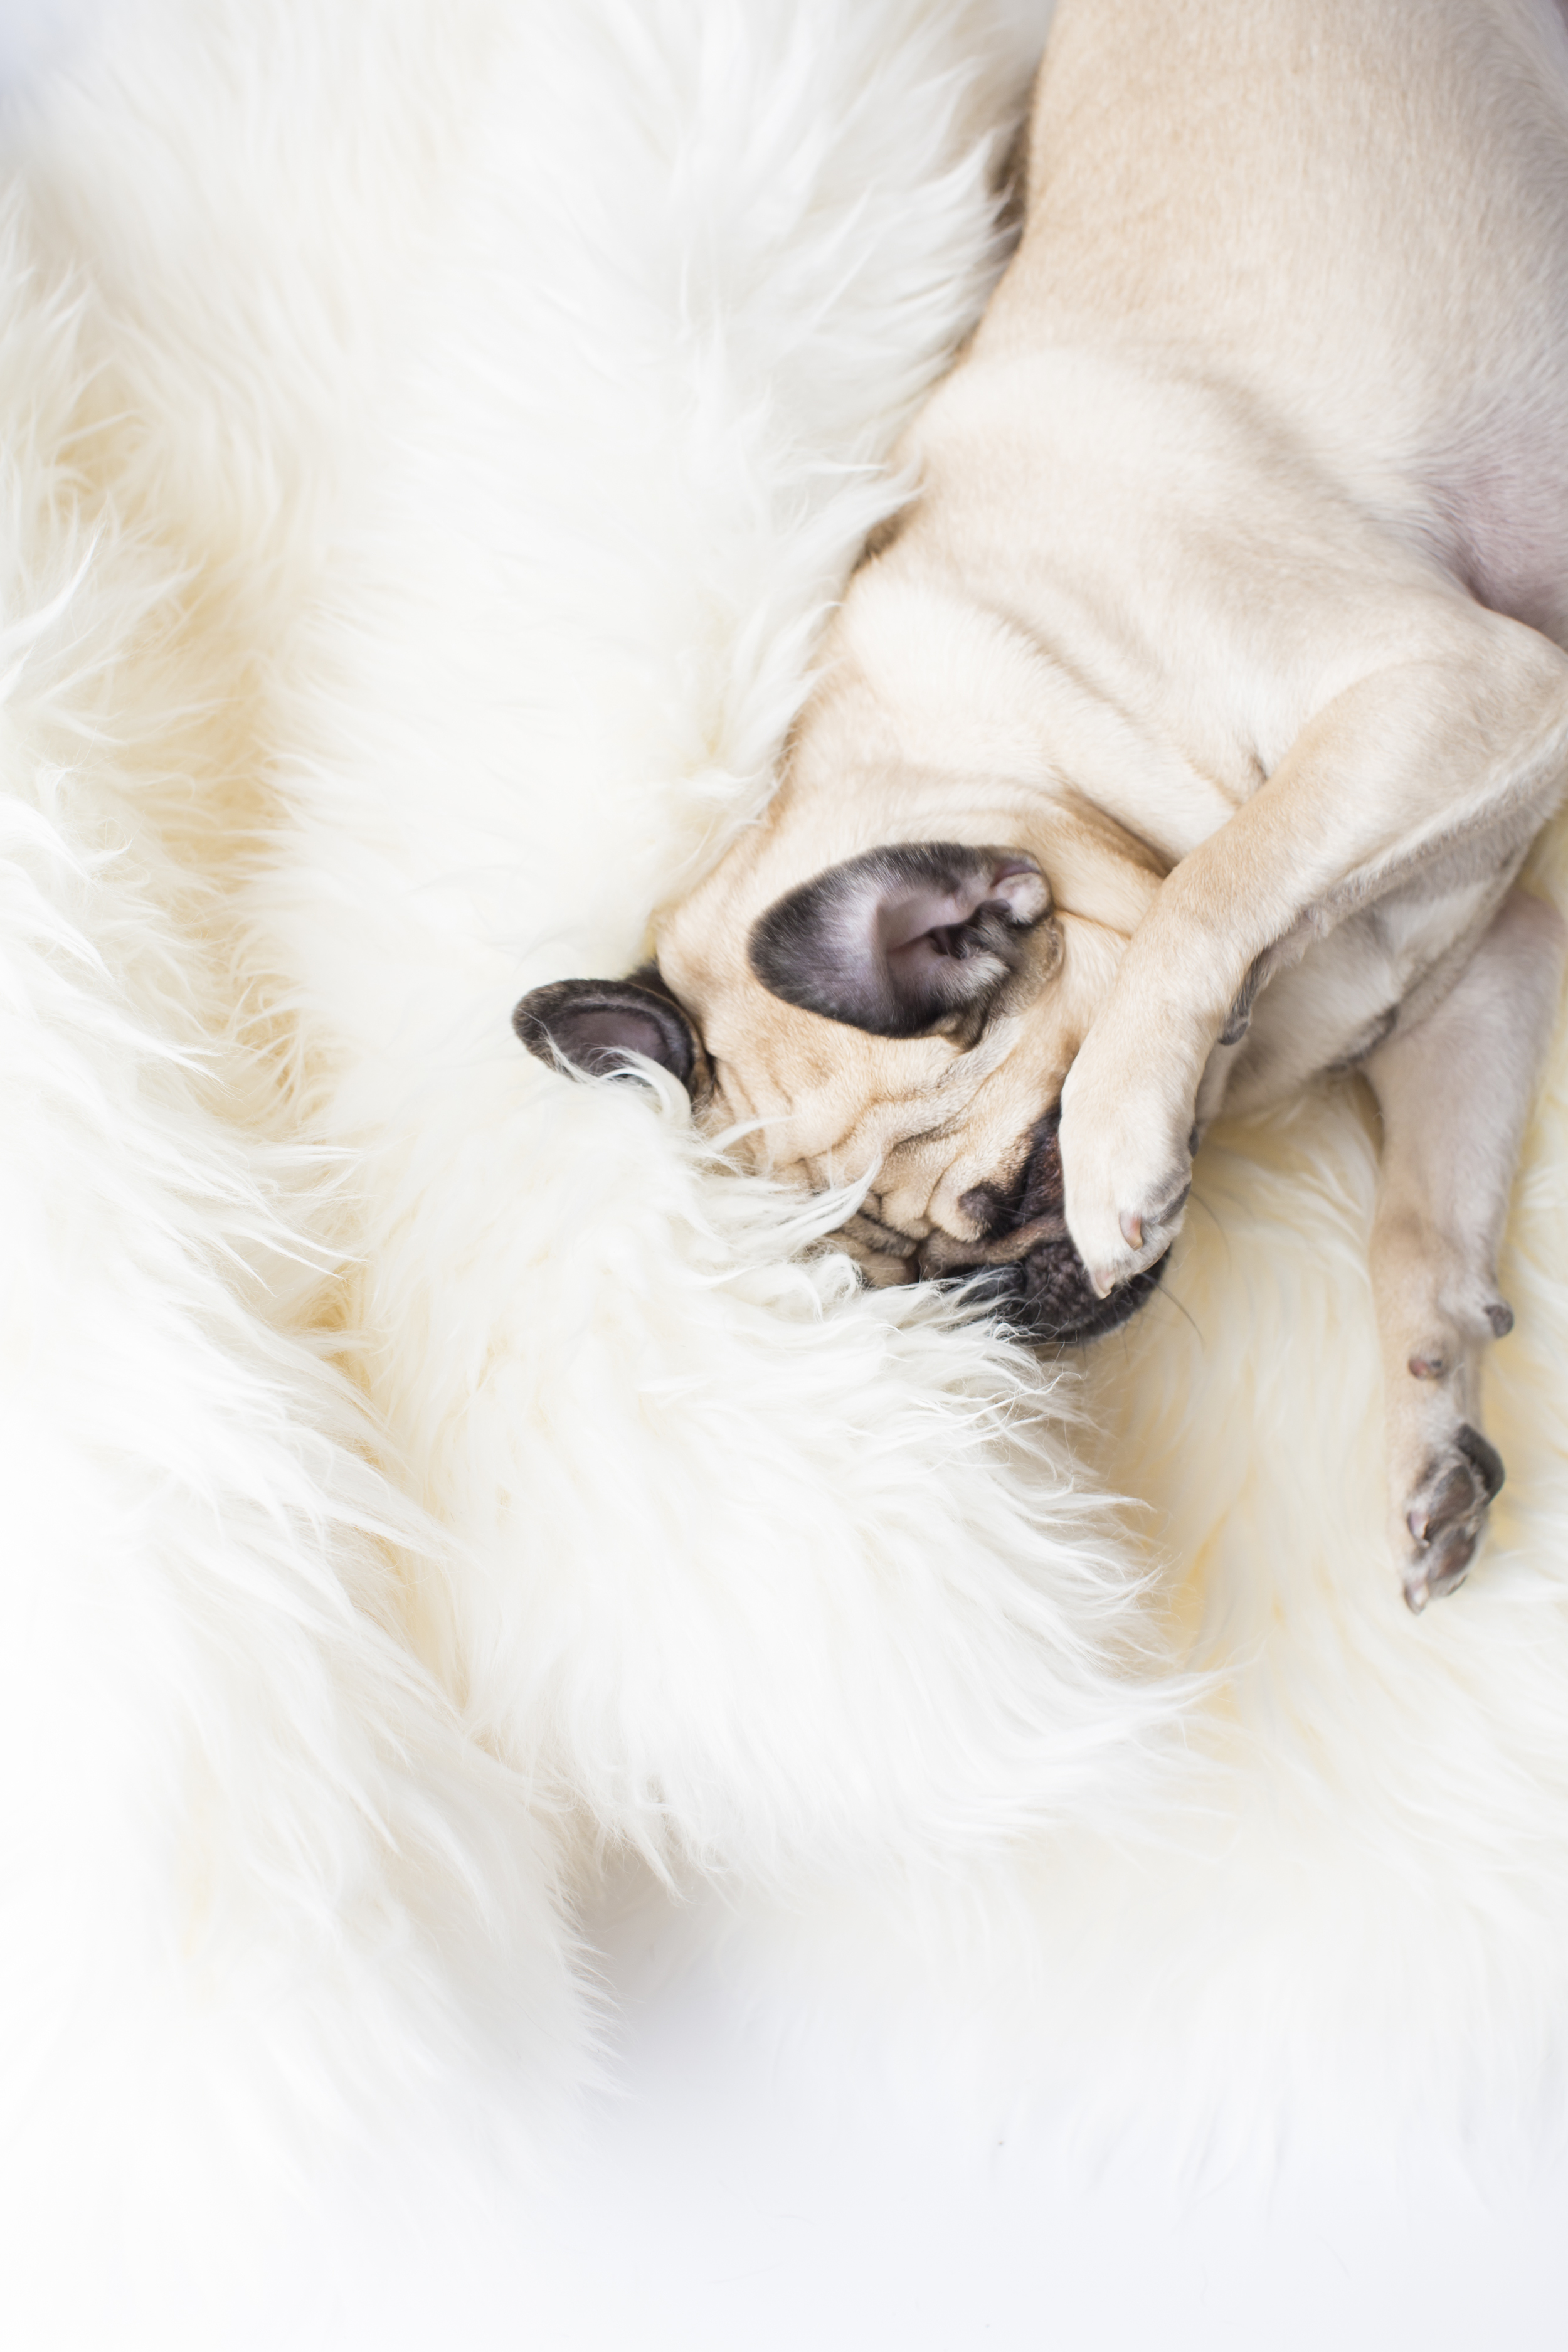 15 Pug rolling playing paw on white fur rug pet photography studio session.jpg